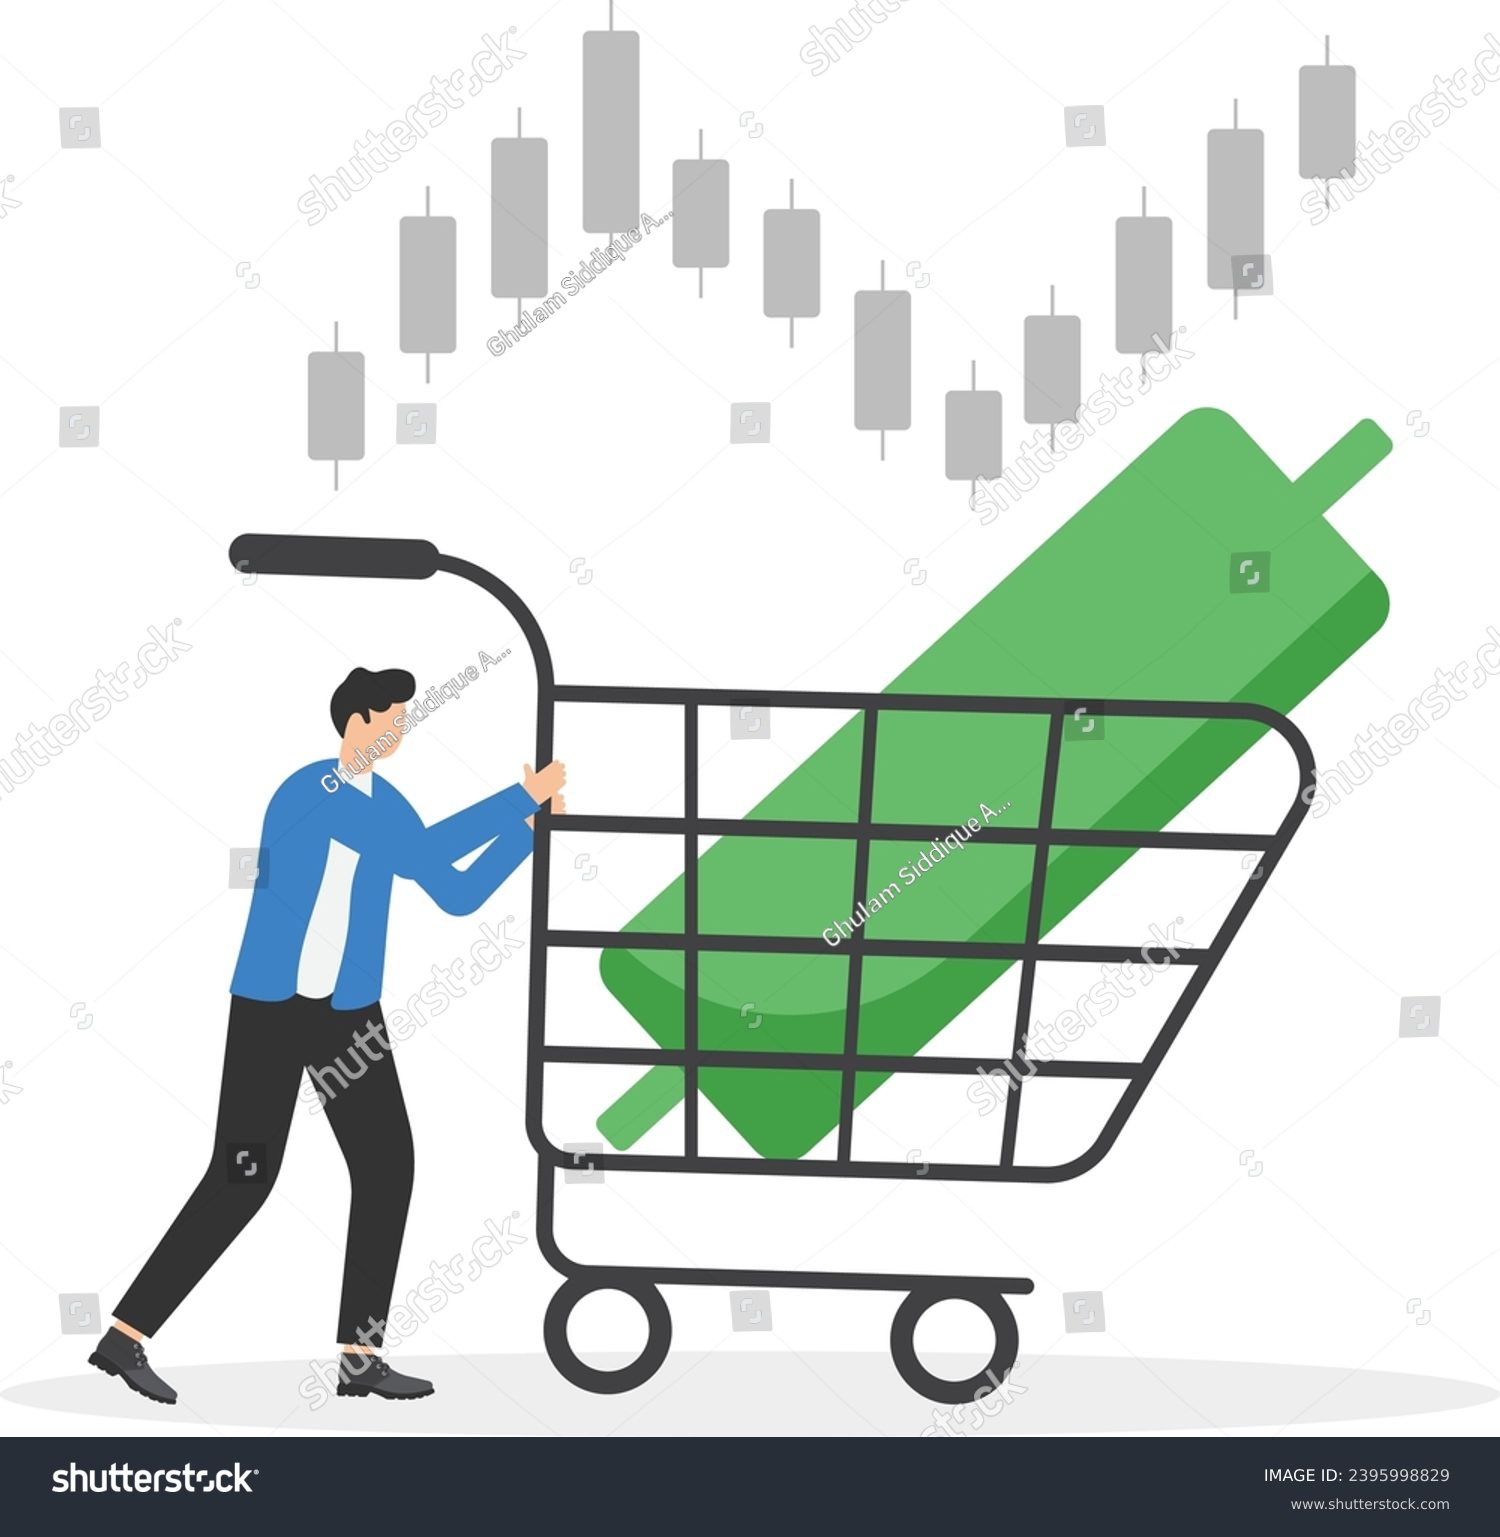 SVG of Buy the dip. Successful traders buy when the price is down. Buy the stock when the price is falling. Profitable strategy in a down market. Profit from the market collapse concept. vector illustration
 svg